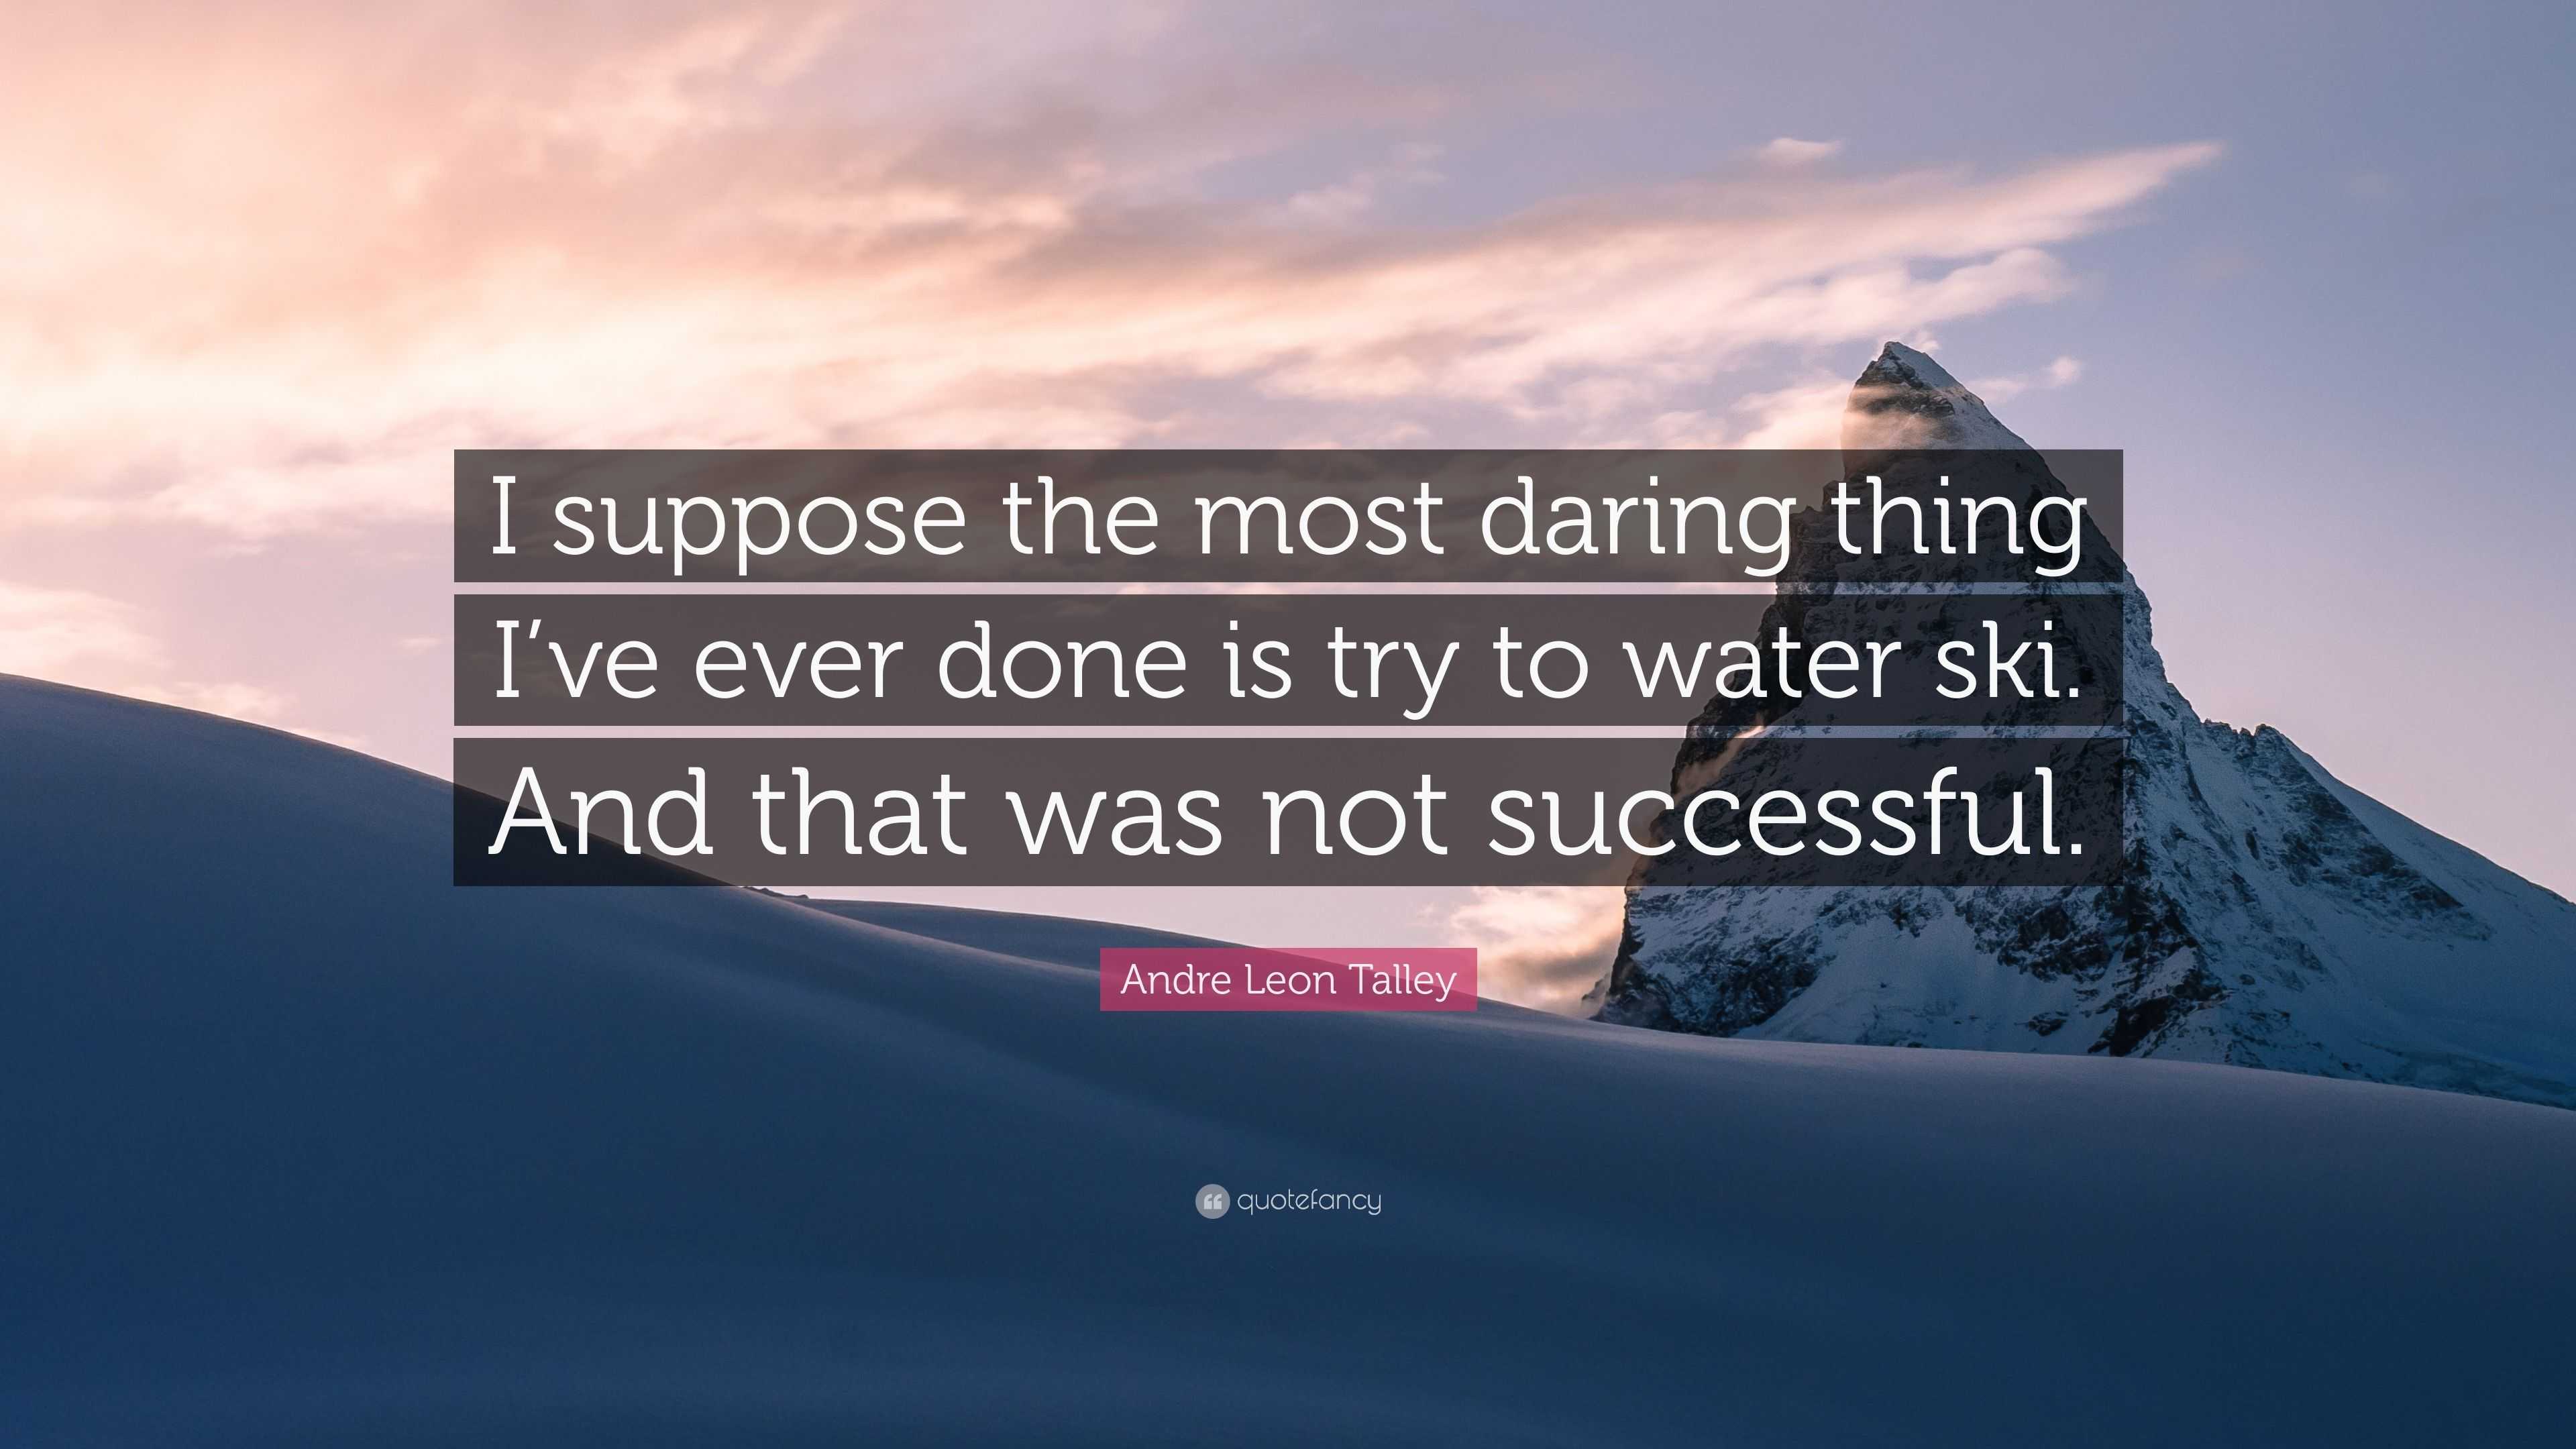 https://quotefancy.com/media/wallpaper/3840x2160/5934996-Andre-Leon-Talley-Quote-I-suppose-the-most-daring-thing-I-ve-ever.jpg